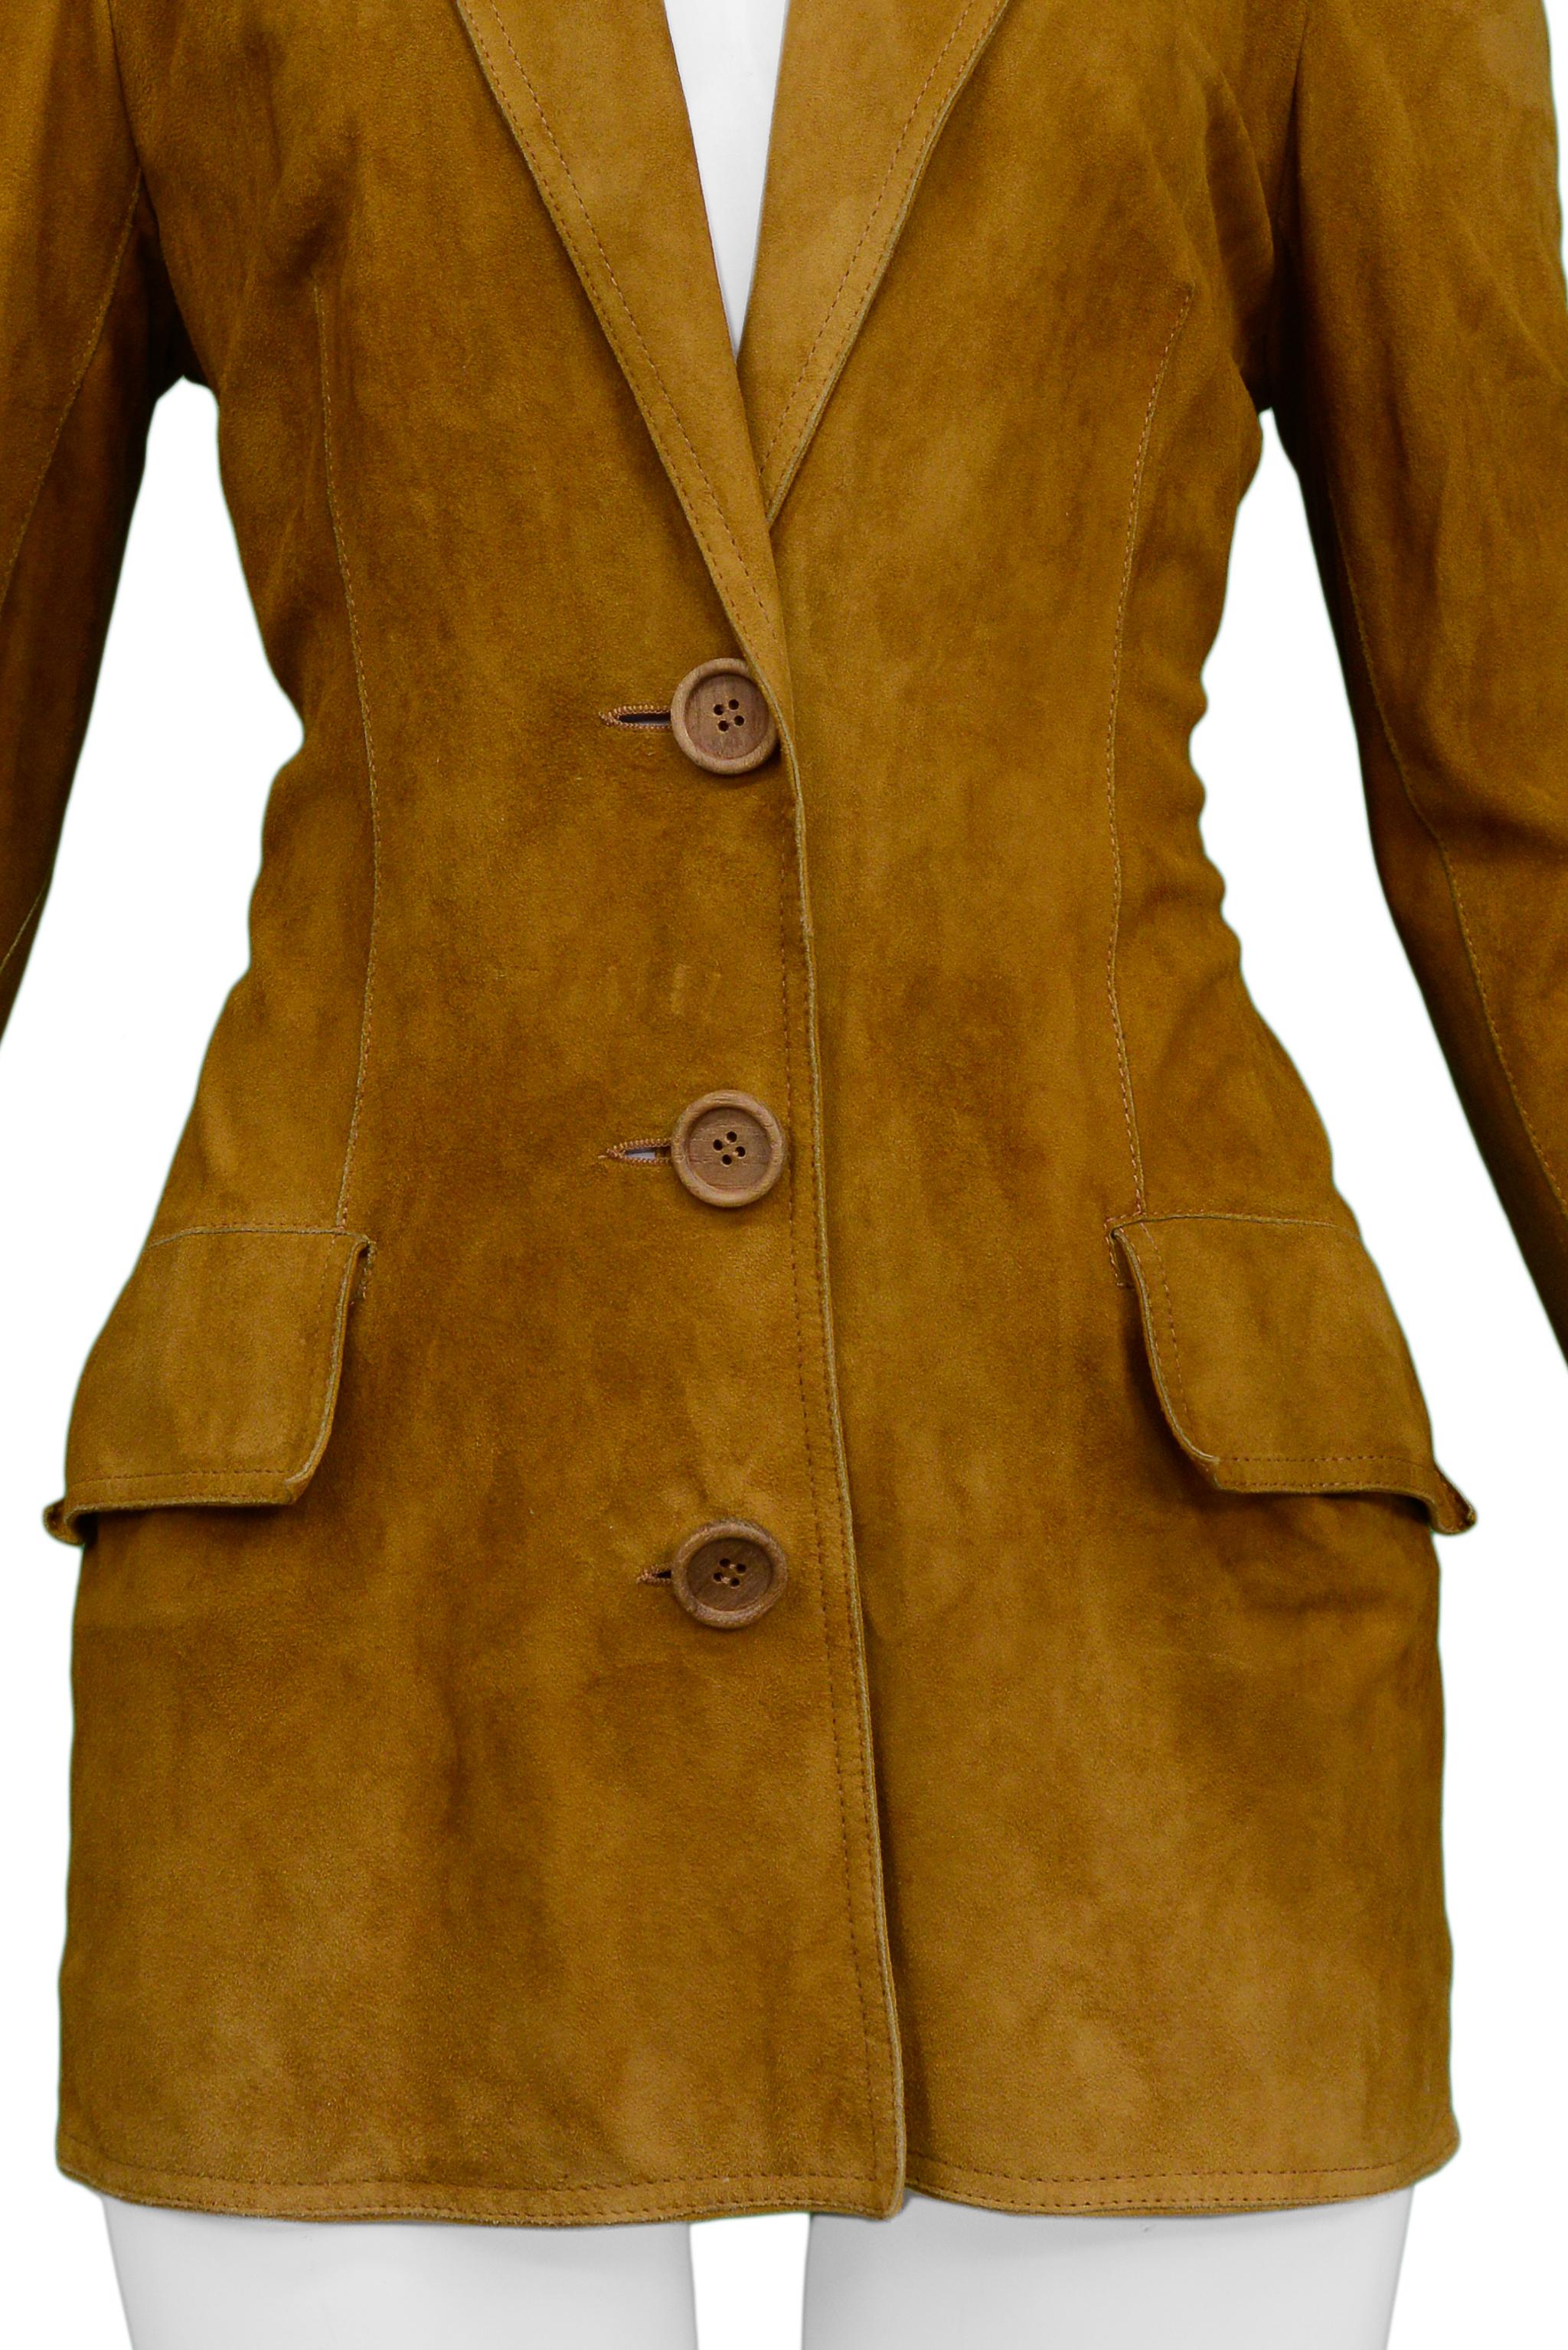 Christian Dior by John Galliano Brown Suede Blazer Jacket with Buttons In Excellent Condition For Sale In Los Angeles, CA